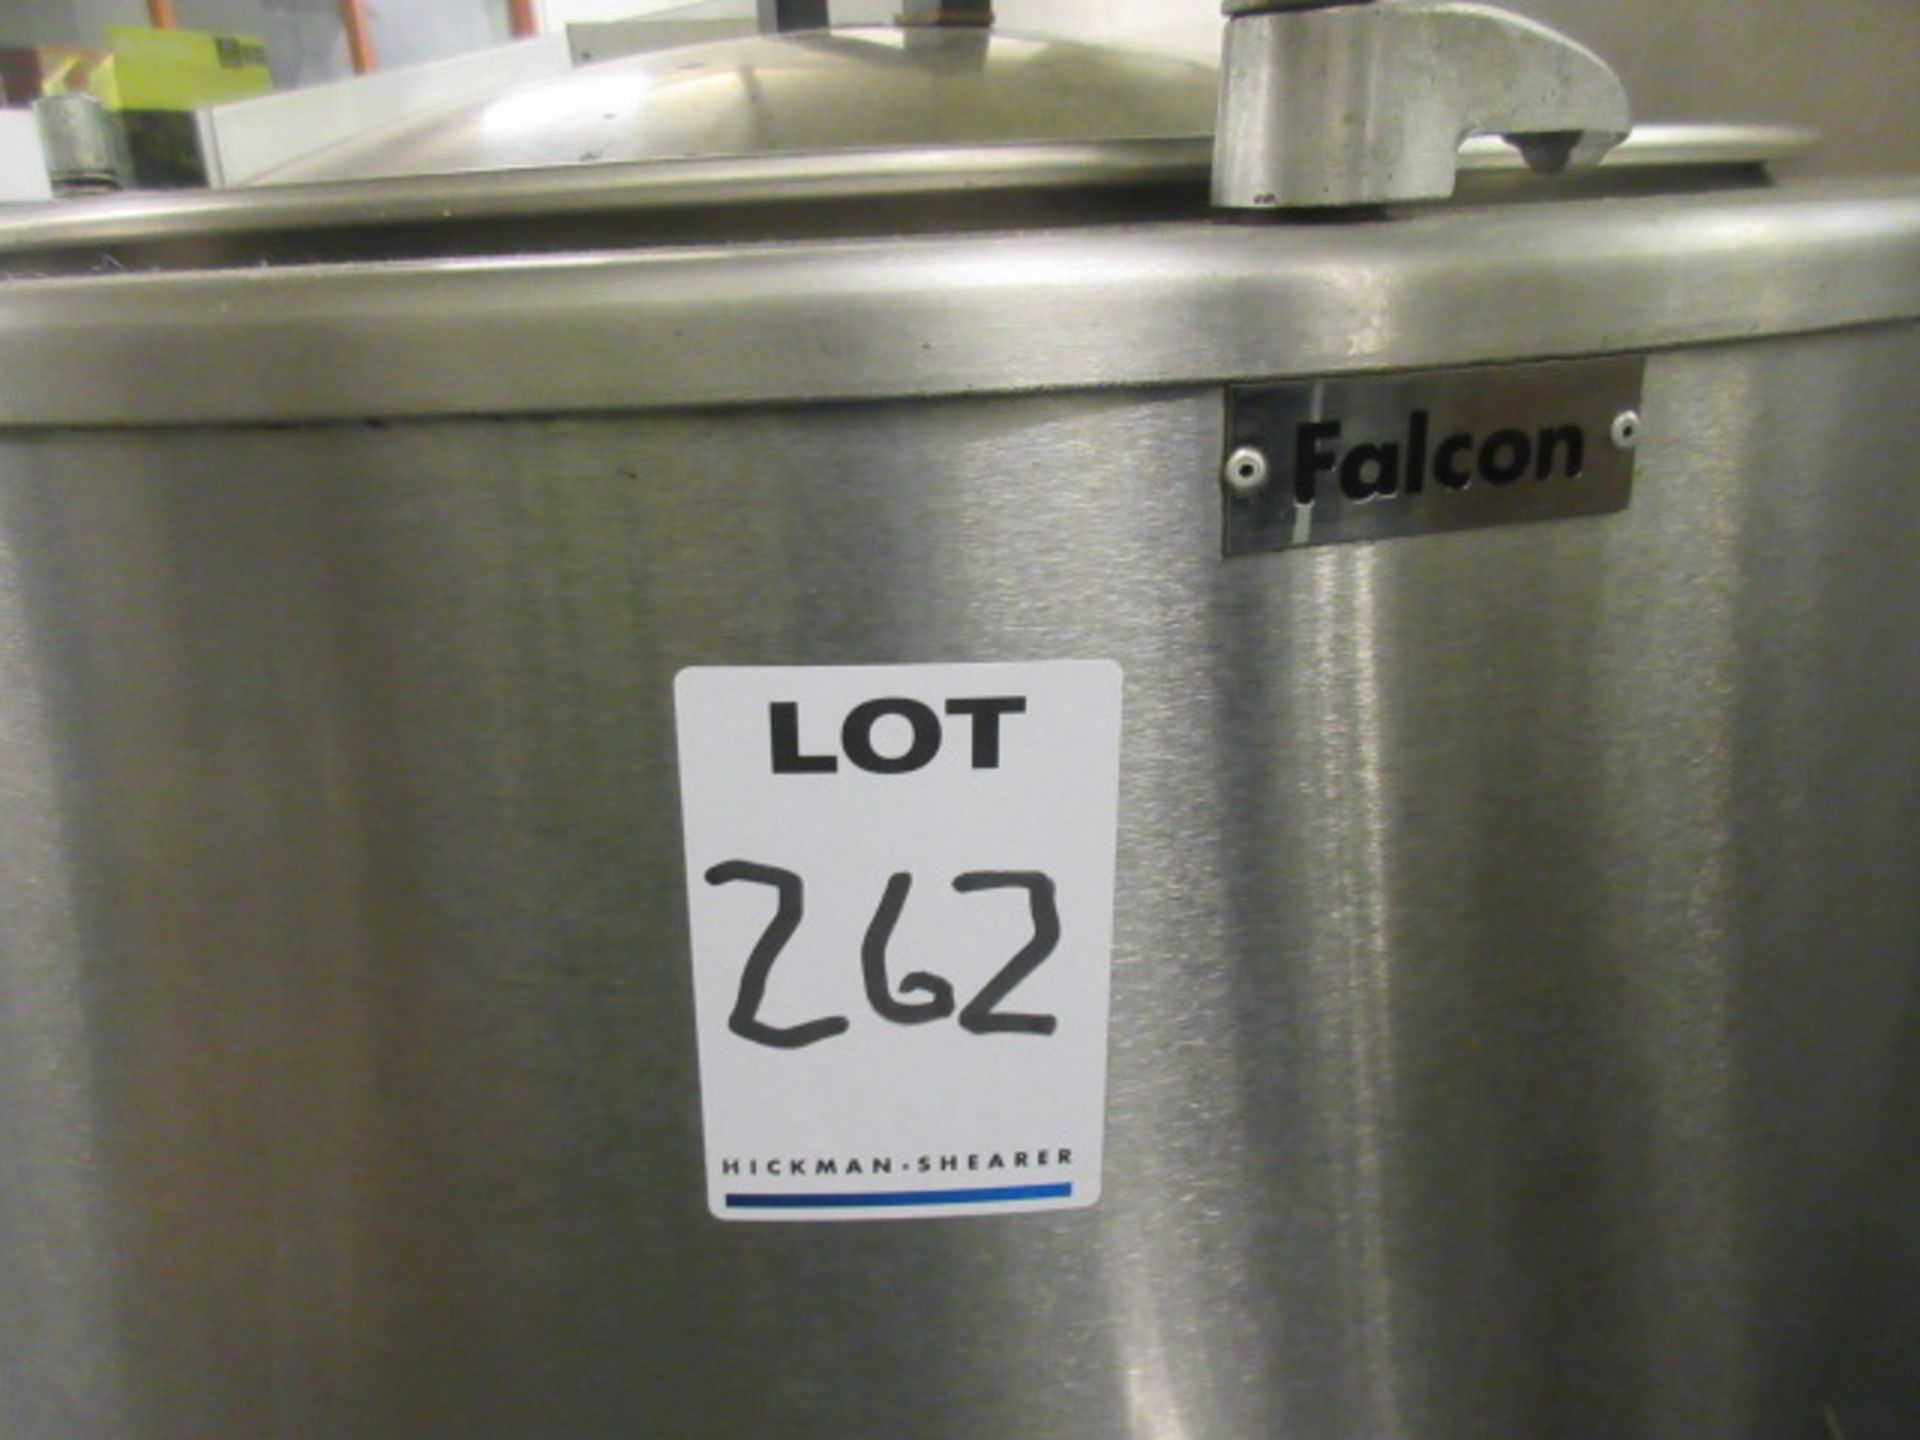 FALCON G3078 90L JACKETED PRESSURE GAS HEATED COOKING VAT. SN F301880 - Image 3 of 3